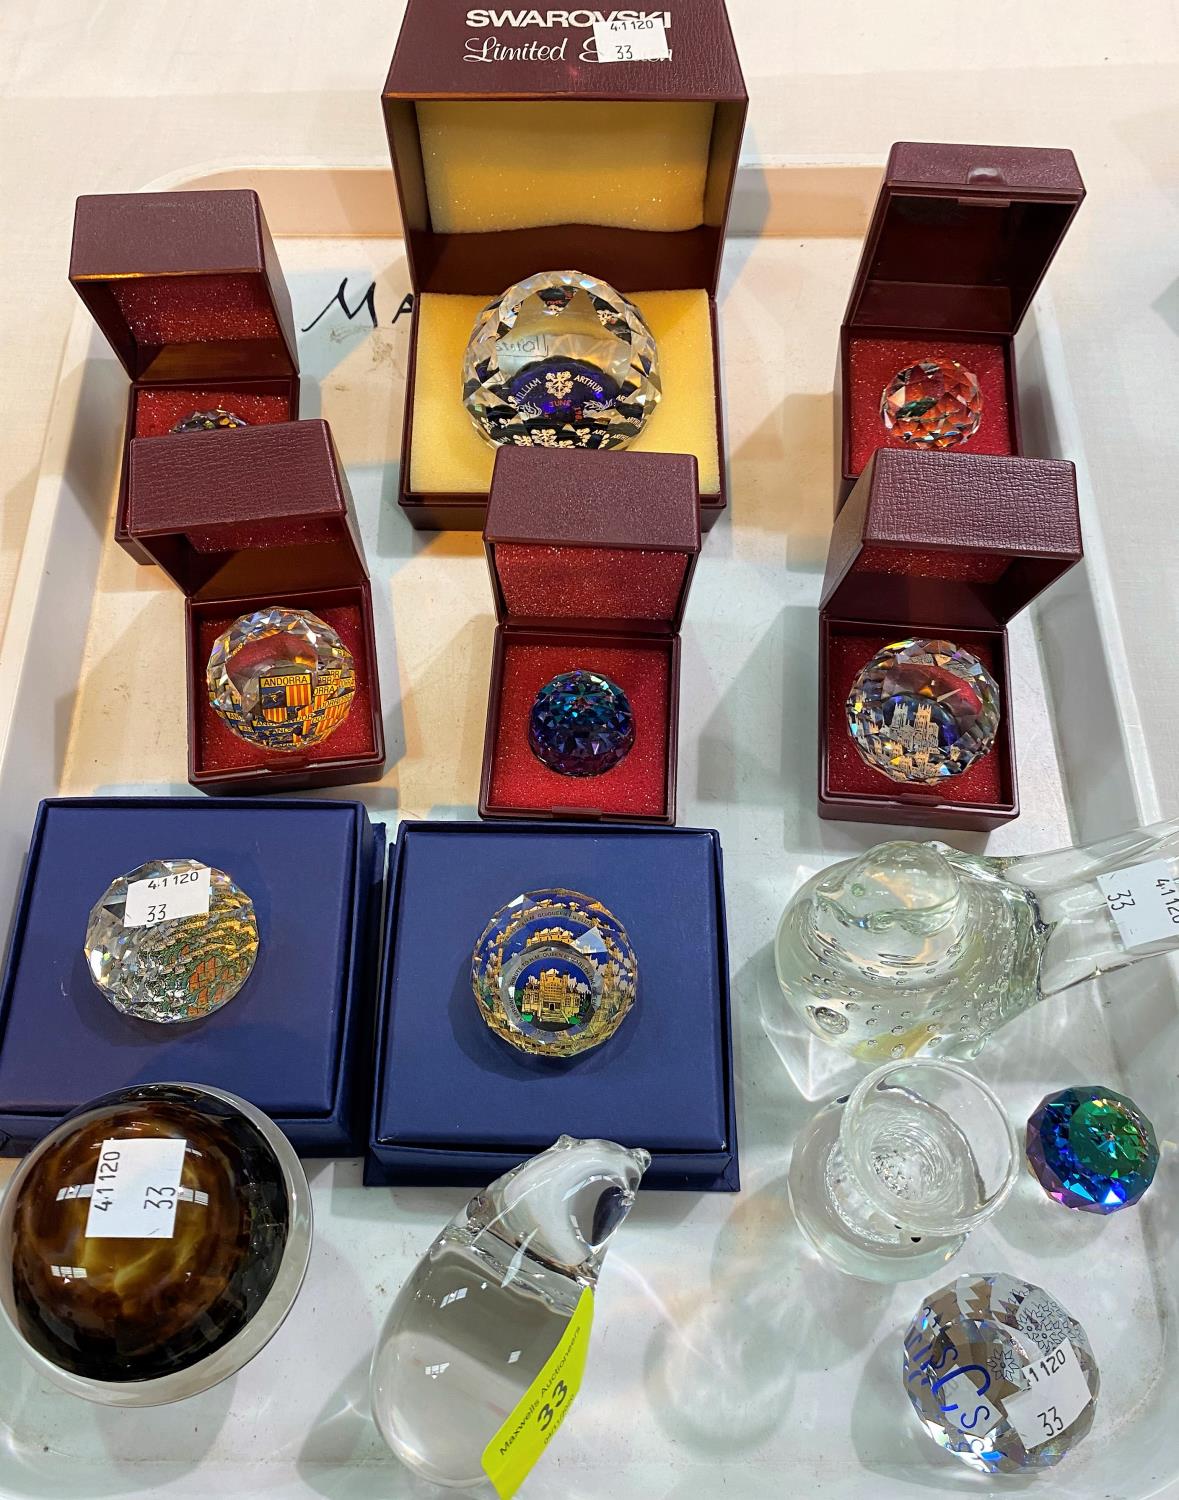 A selection of originally boxed Swarovski crystal paperweights & glassware.